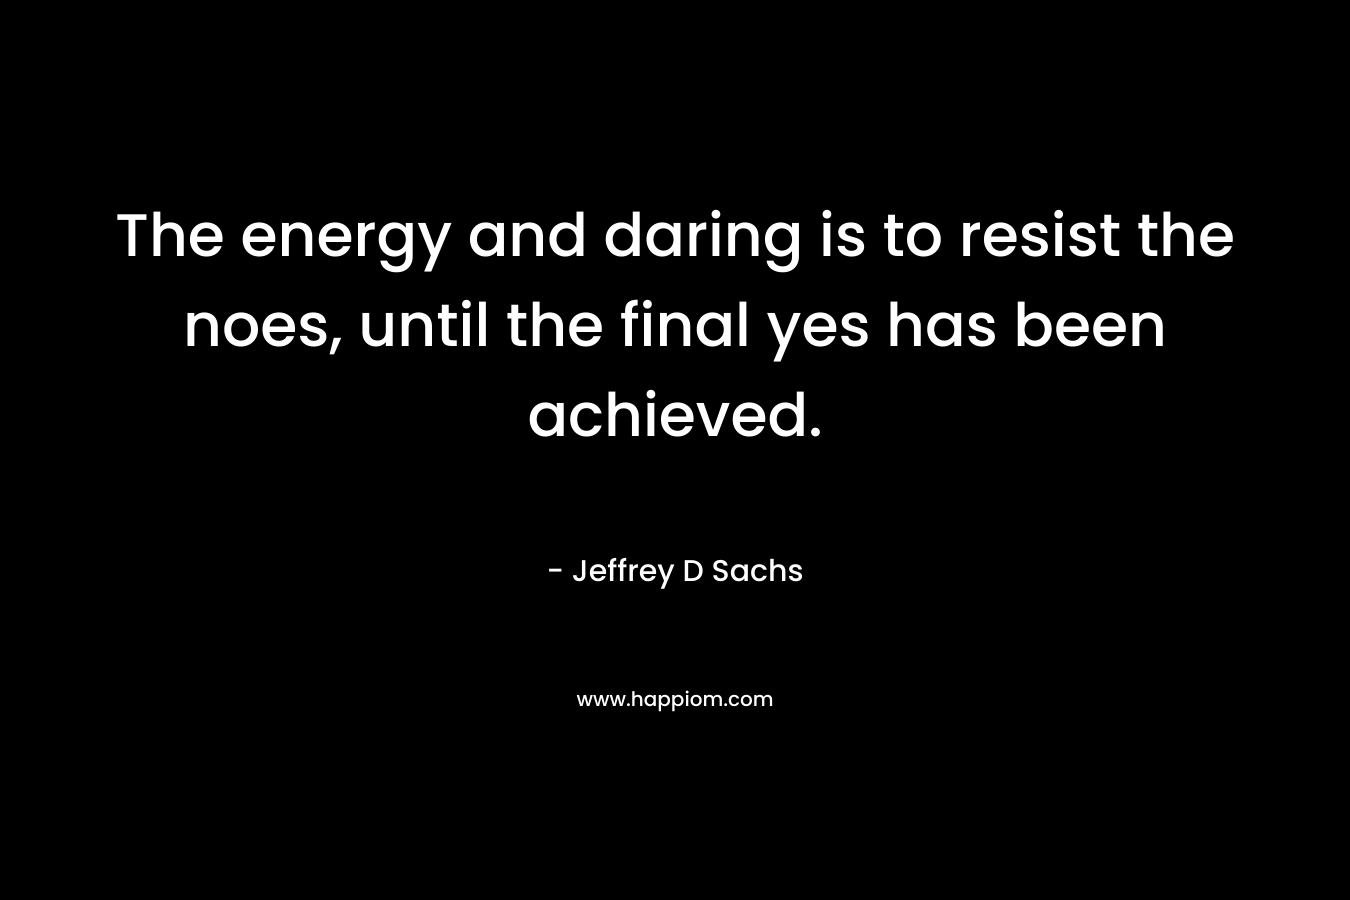 The energy and daring is to resist the noes, until the final yes has been achieved.